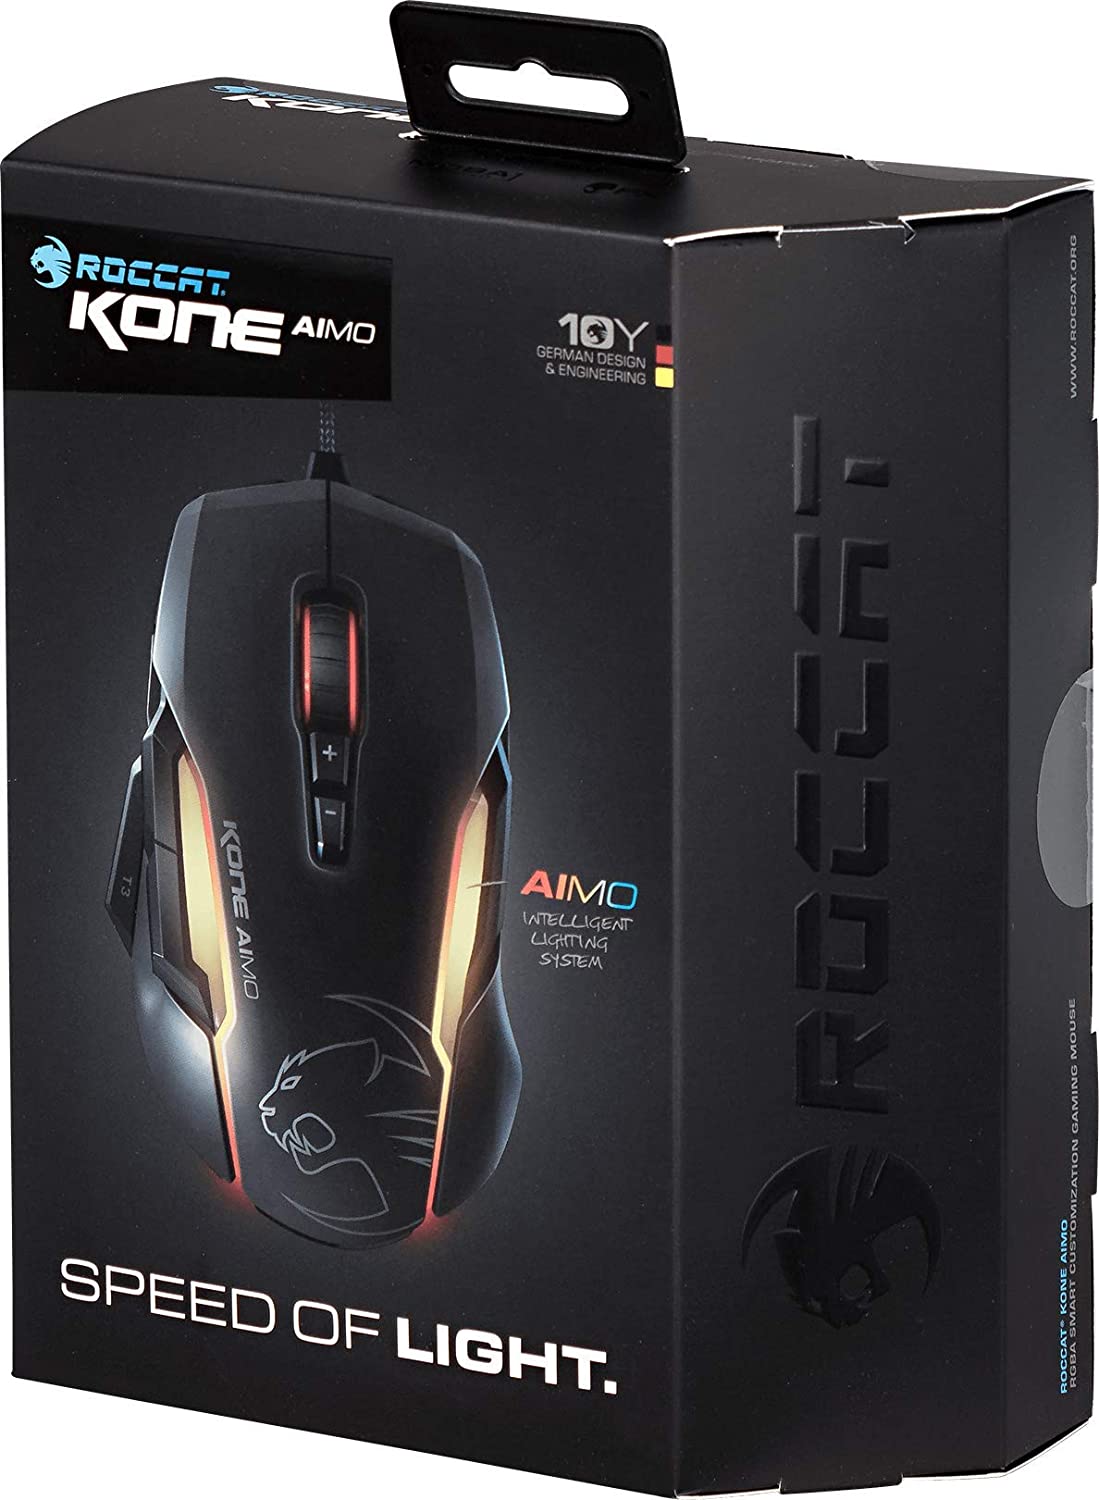 71Qr9Iq65Hl. Ac Sl1500 Roccat Https://Youtu.be/Mfk3Bmiiu8C Roccat® Swarm Powered – Comprehensive Driver Suite With A Striking Design And A Stunning Feature Set, The Kone Aimo Channels The Legacy Of Its Predecessor. It Boasts Refined Ergonomics With Enhanced Button Distinction, But What Truly Sets It Apart Is Its Rgba Double Lightguides Powered By The State-Of-The-Art Aimo Intelligent Lighting System. Aimo Is The Vivid Illumination Eco-System From Roccat®. Its Functionality Grows Exponentially Based On The Number Of Aimo-Enabled Devices Connected. It Also Reacts Intuitively And Organically To Your Computing Behavior. Eliminating The Need For Configuration, It Presents A State-Of-The-Art Lighting Scenario Right Out Of The Box, For A Completely Fluid, Next-Gen Experience. The Kone Aimo Features A Tri-Button Thumb Zone For A New And Even Greater Level Of Control. It Includes Two Wide Buttons Suitable For All Hand Sizes, Plus An Ergonomic Lower Button Set To Easy-Shift[+]™ By Default. Easy-Shift[+]™ Is The World-Famous Button Duplicator Technology That Lets You Assign A Secondary Function To The Mouse'S Buttons. It'S Easy To Program And Has Options For Simple Commands And Complex Macros. Roccat - ماوس ألعاب مخصص ذكي من Kone Aimo Rgba (رمادي) 23 مفتاحًا قابلًا للبرمجة ، مصمم في ألمانيا